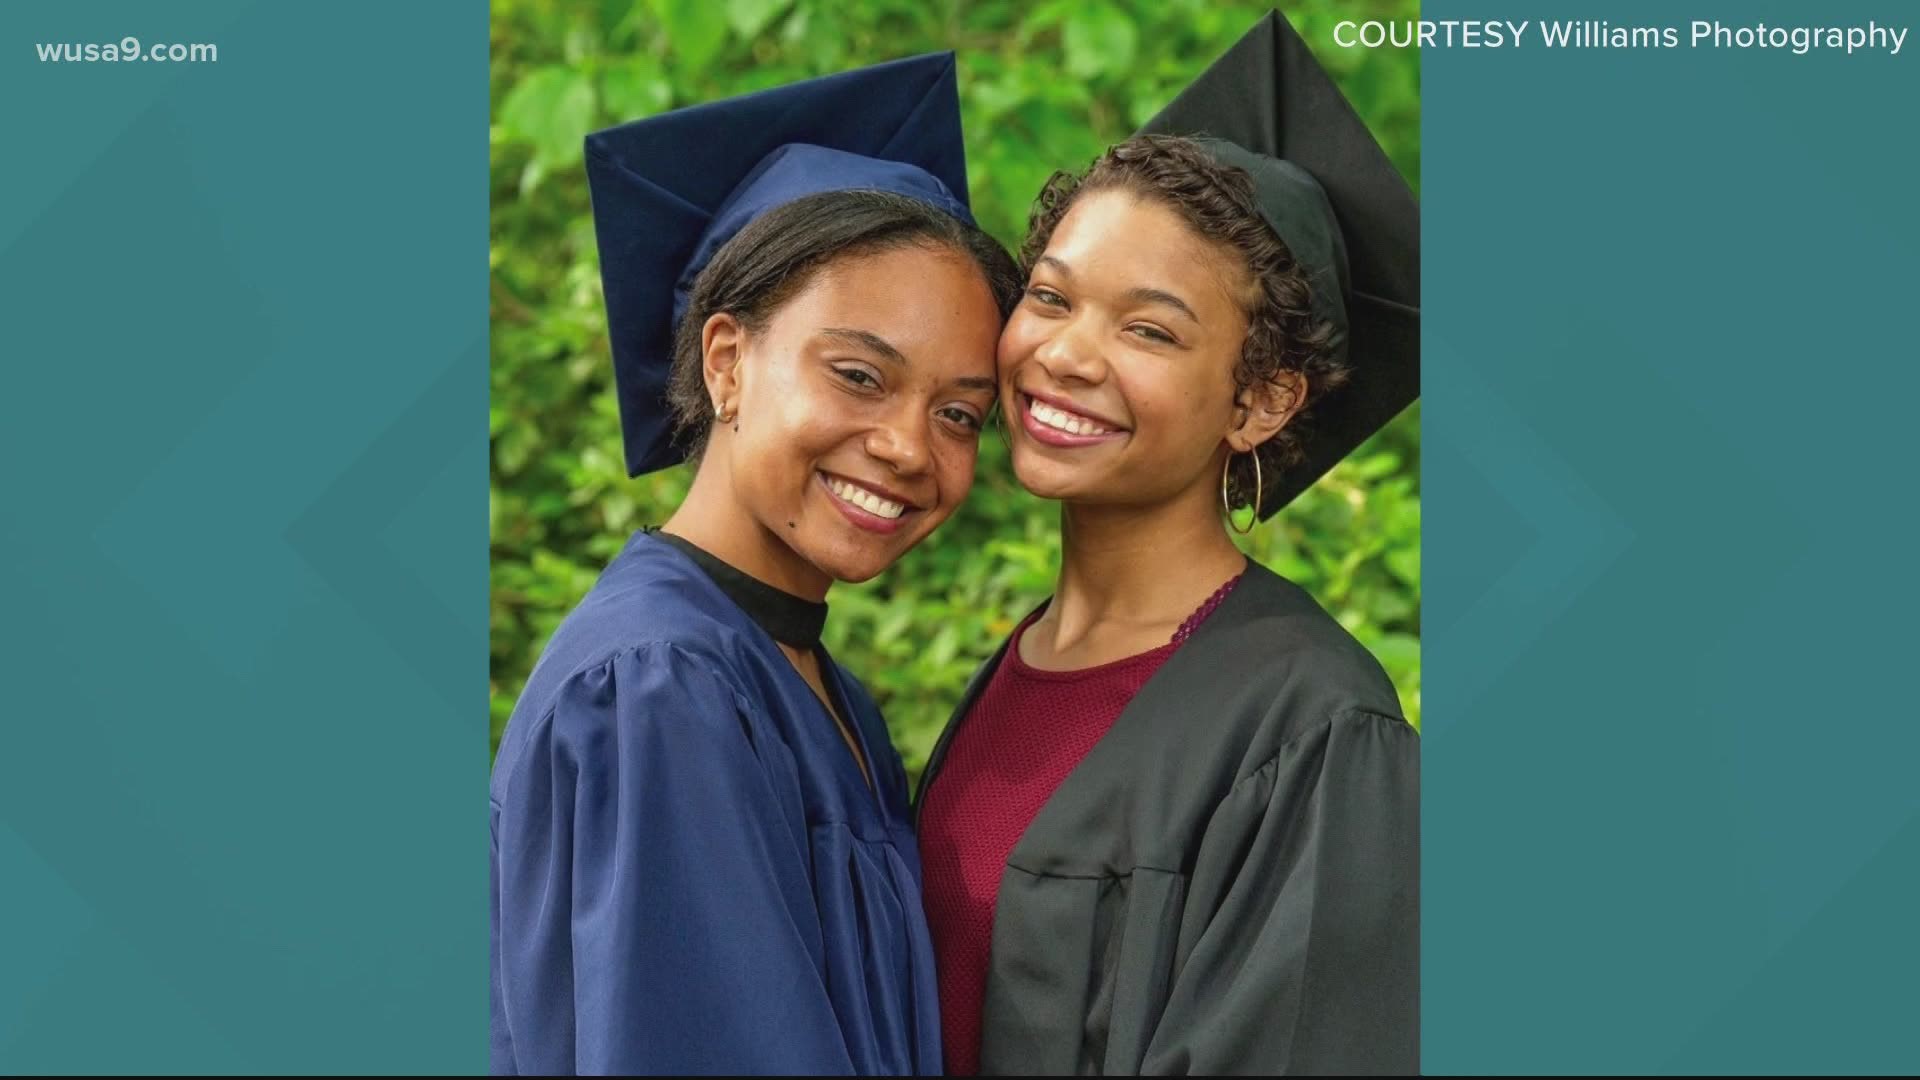 Howard University hosts its 152nd commencement ceremony.